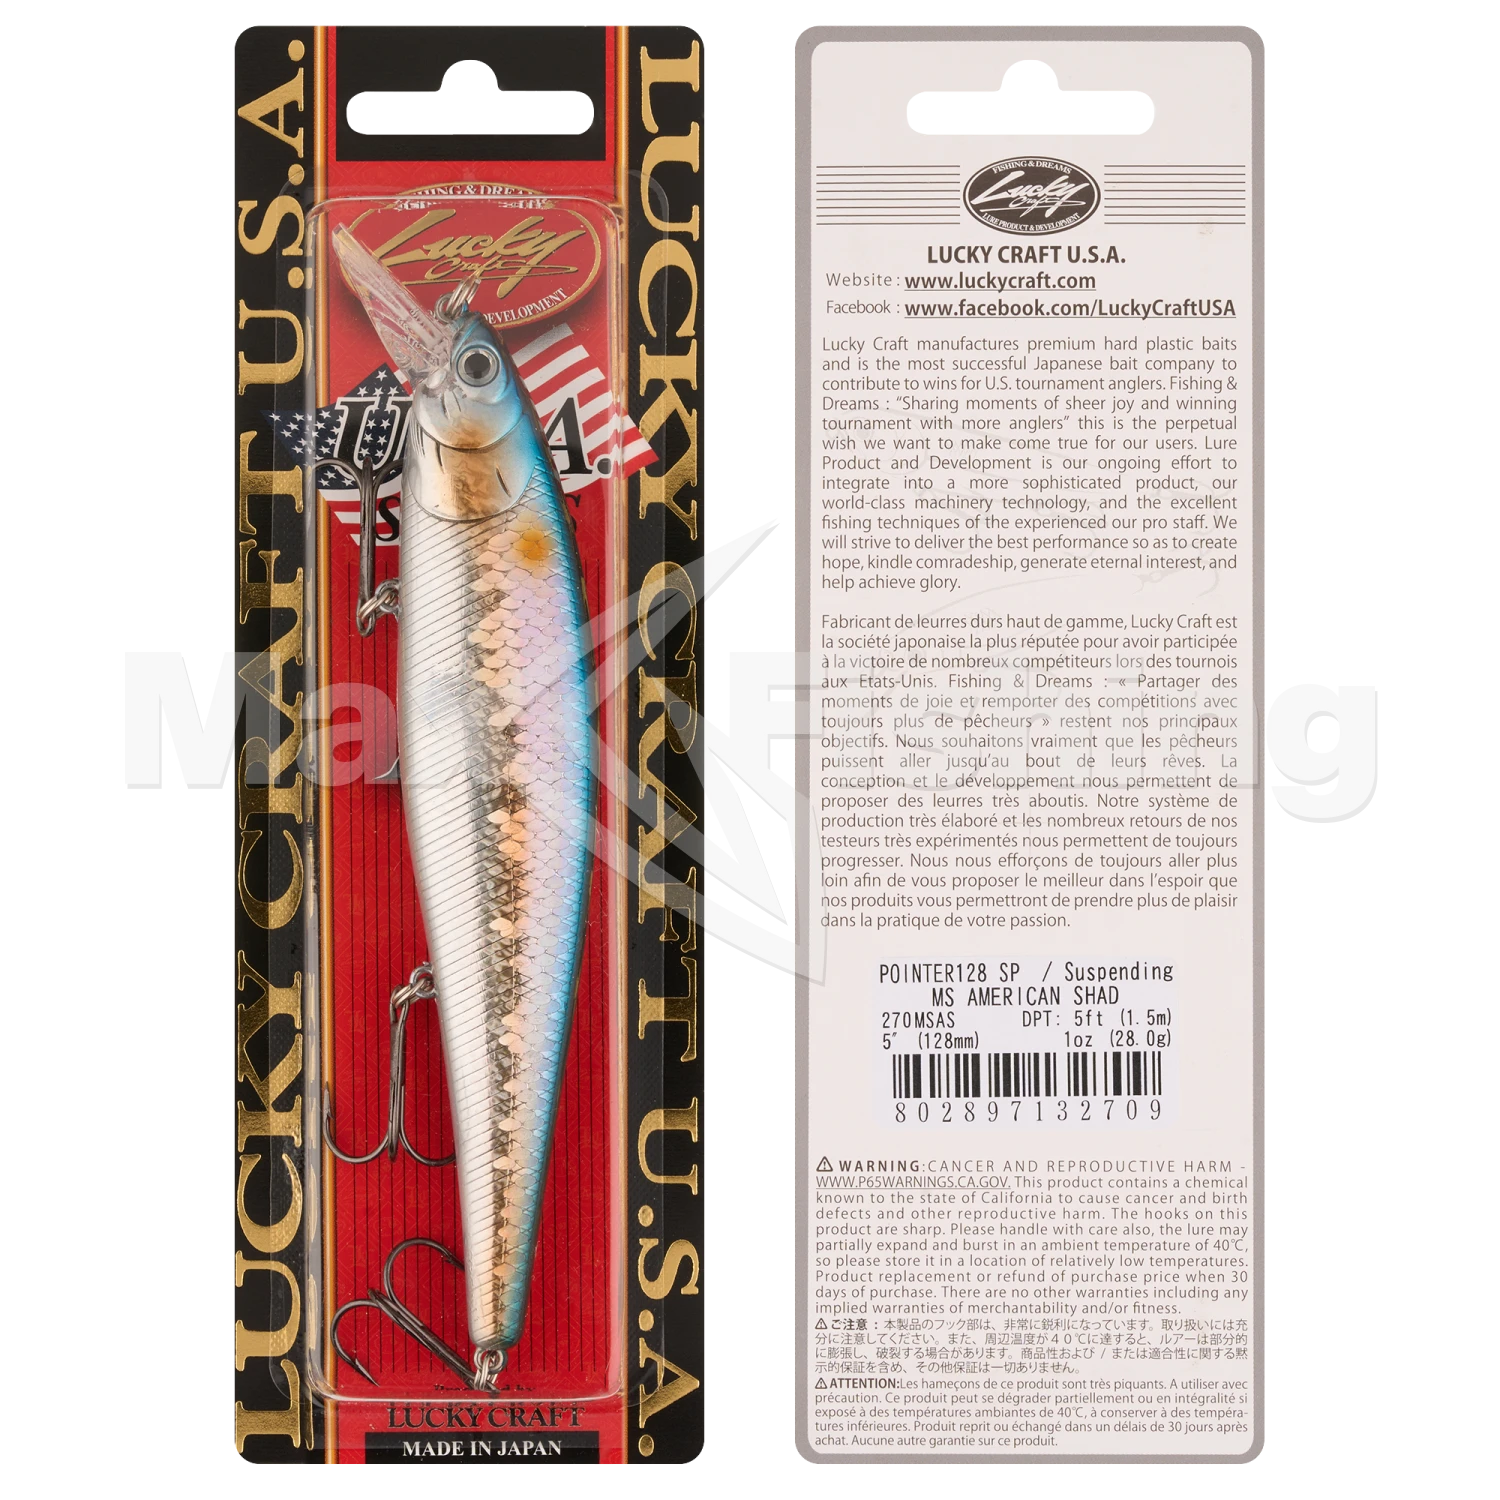 Воблер Lucky Craft Pointer 128 SP #270 MS American Shad